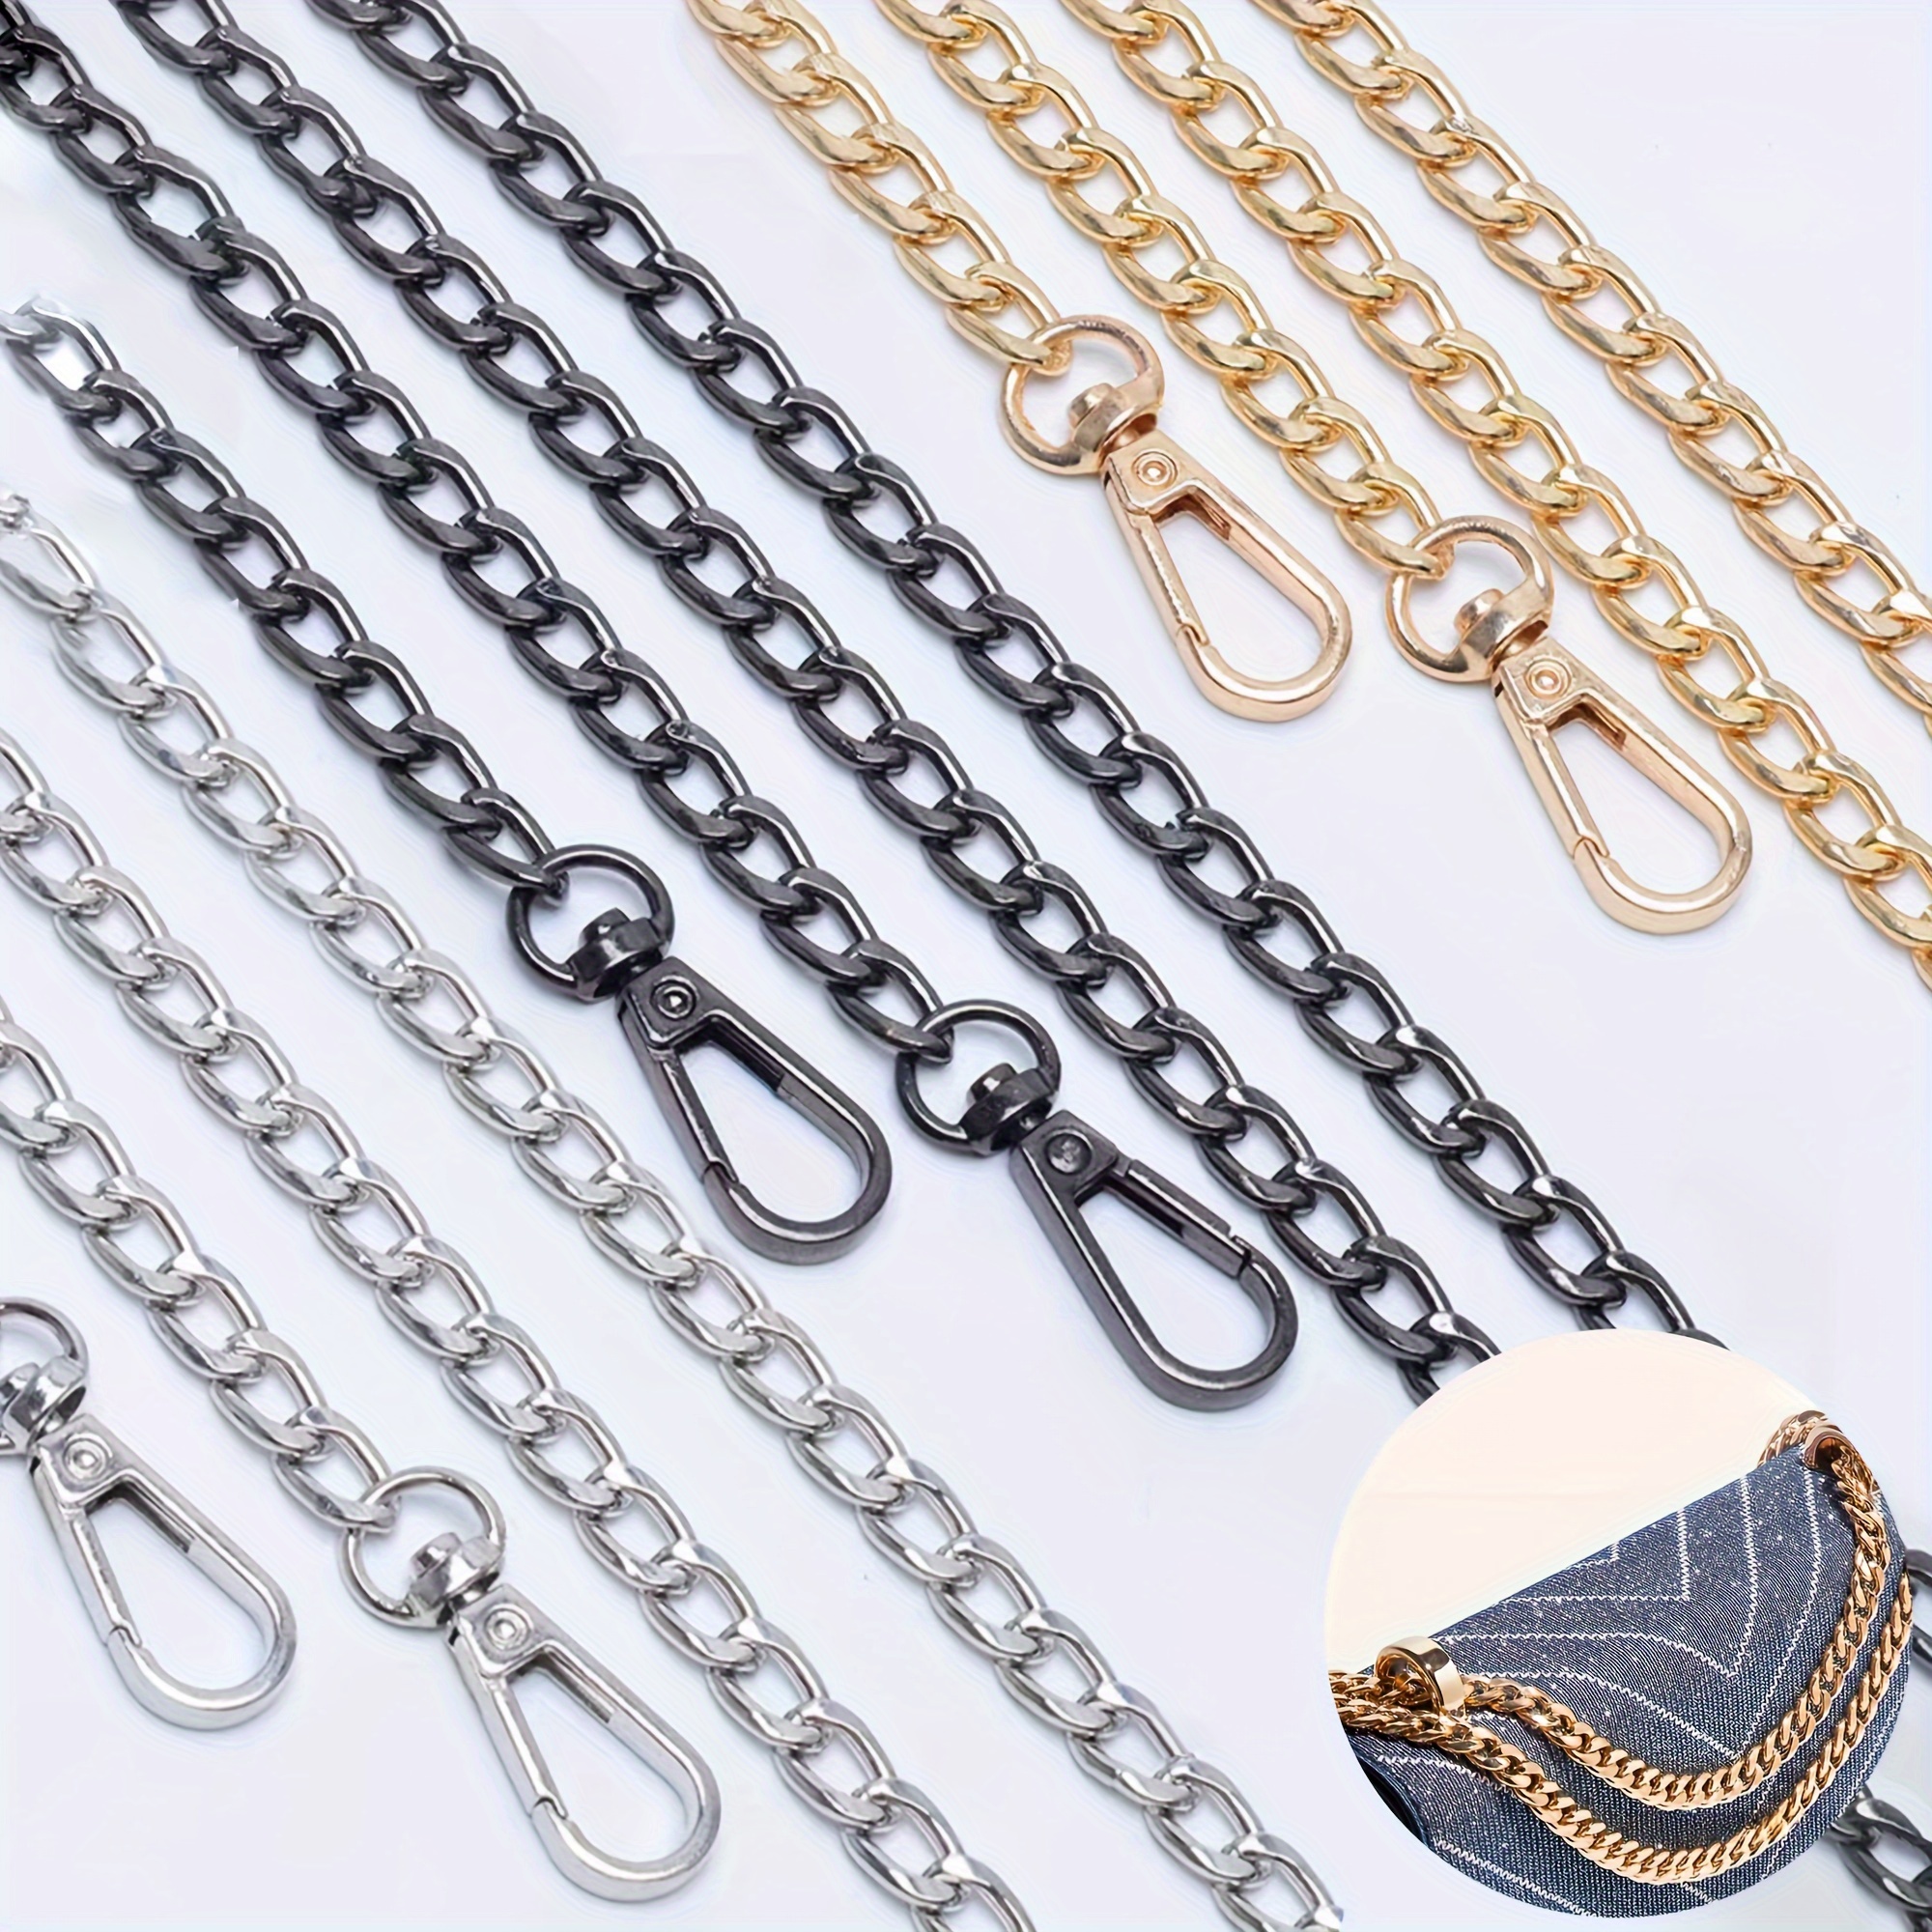 

Diy Aluminum Alloy Bag Chain Strap, 47.24in - Versatile Purse & Luggage Accessory For Crafting